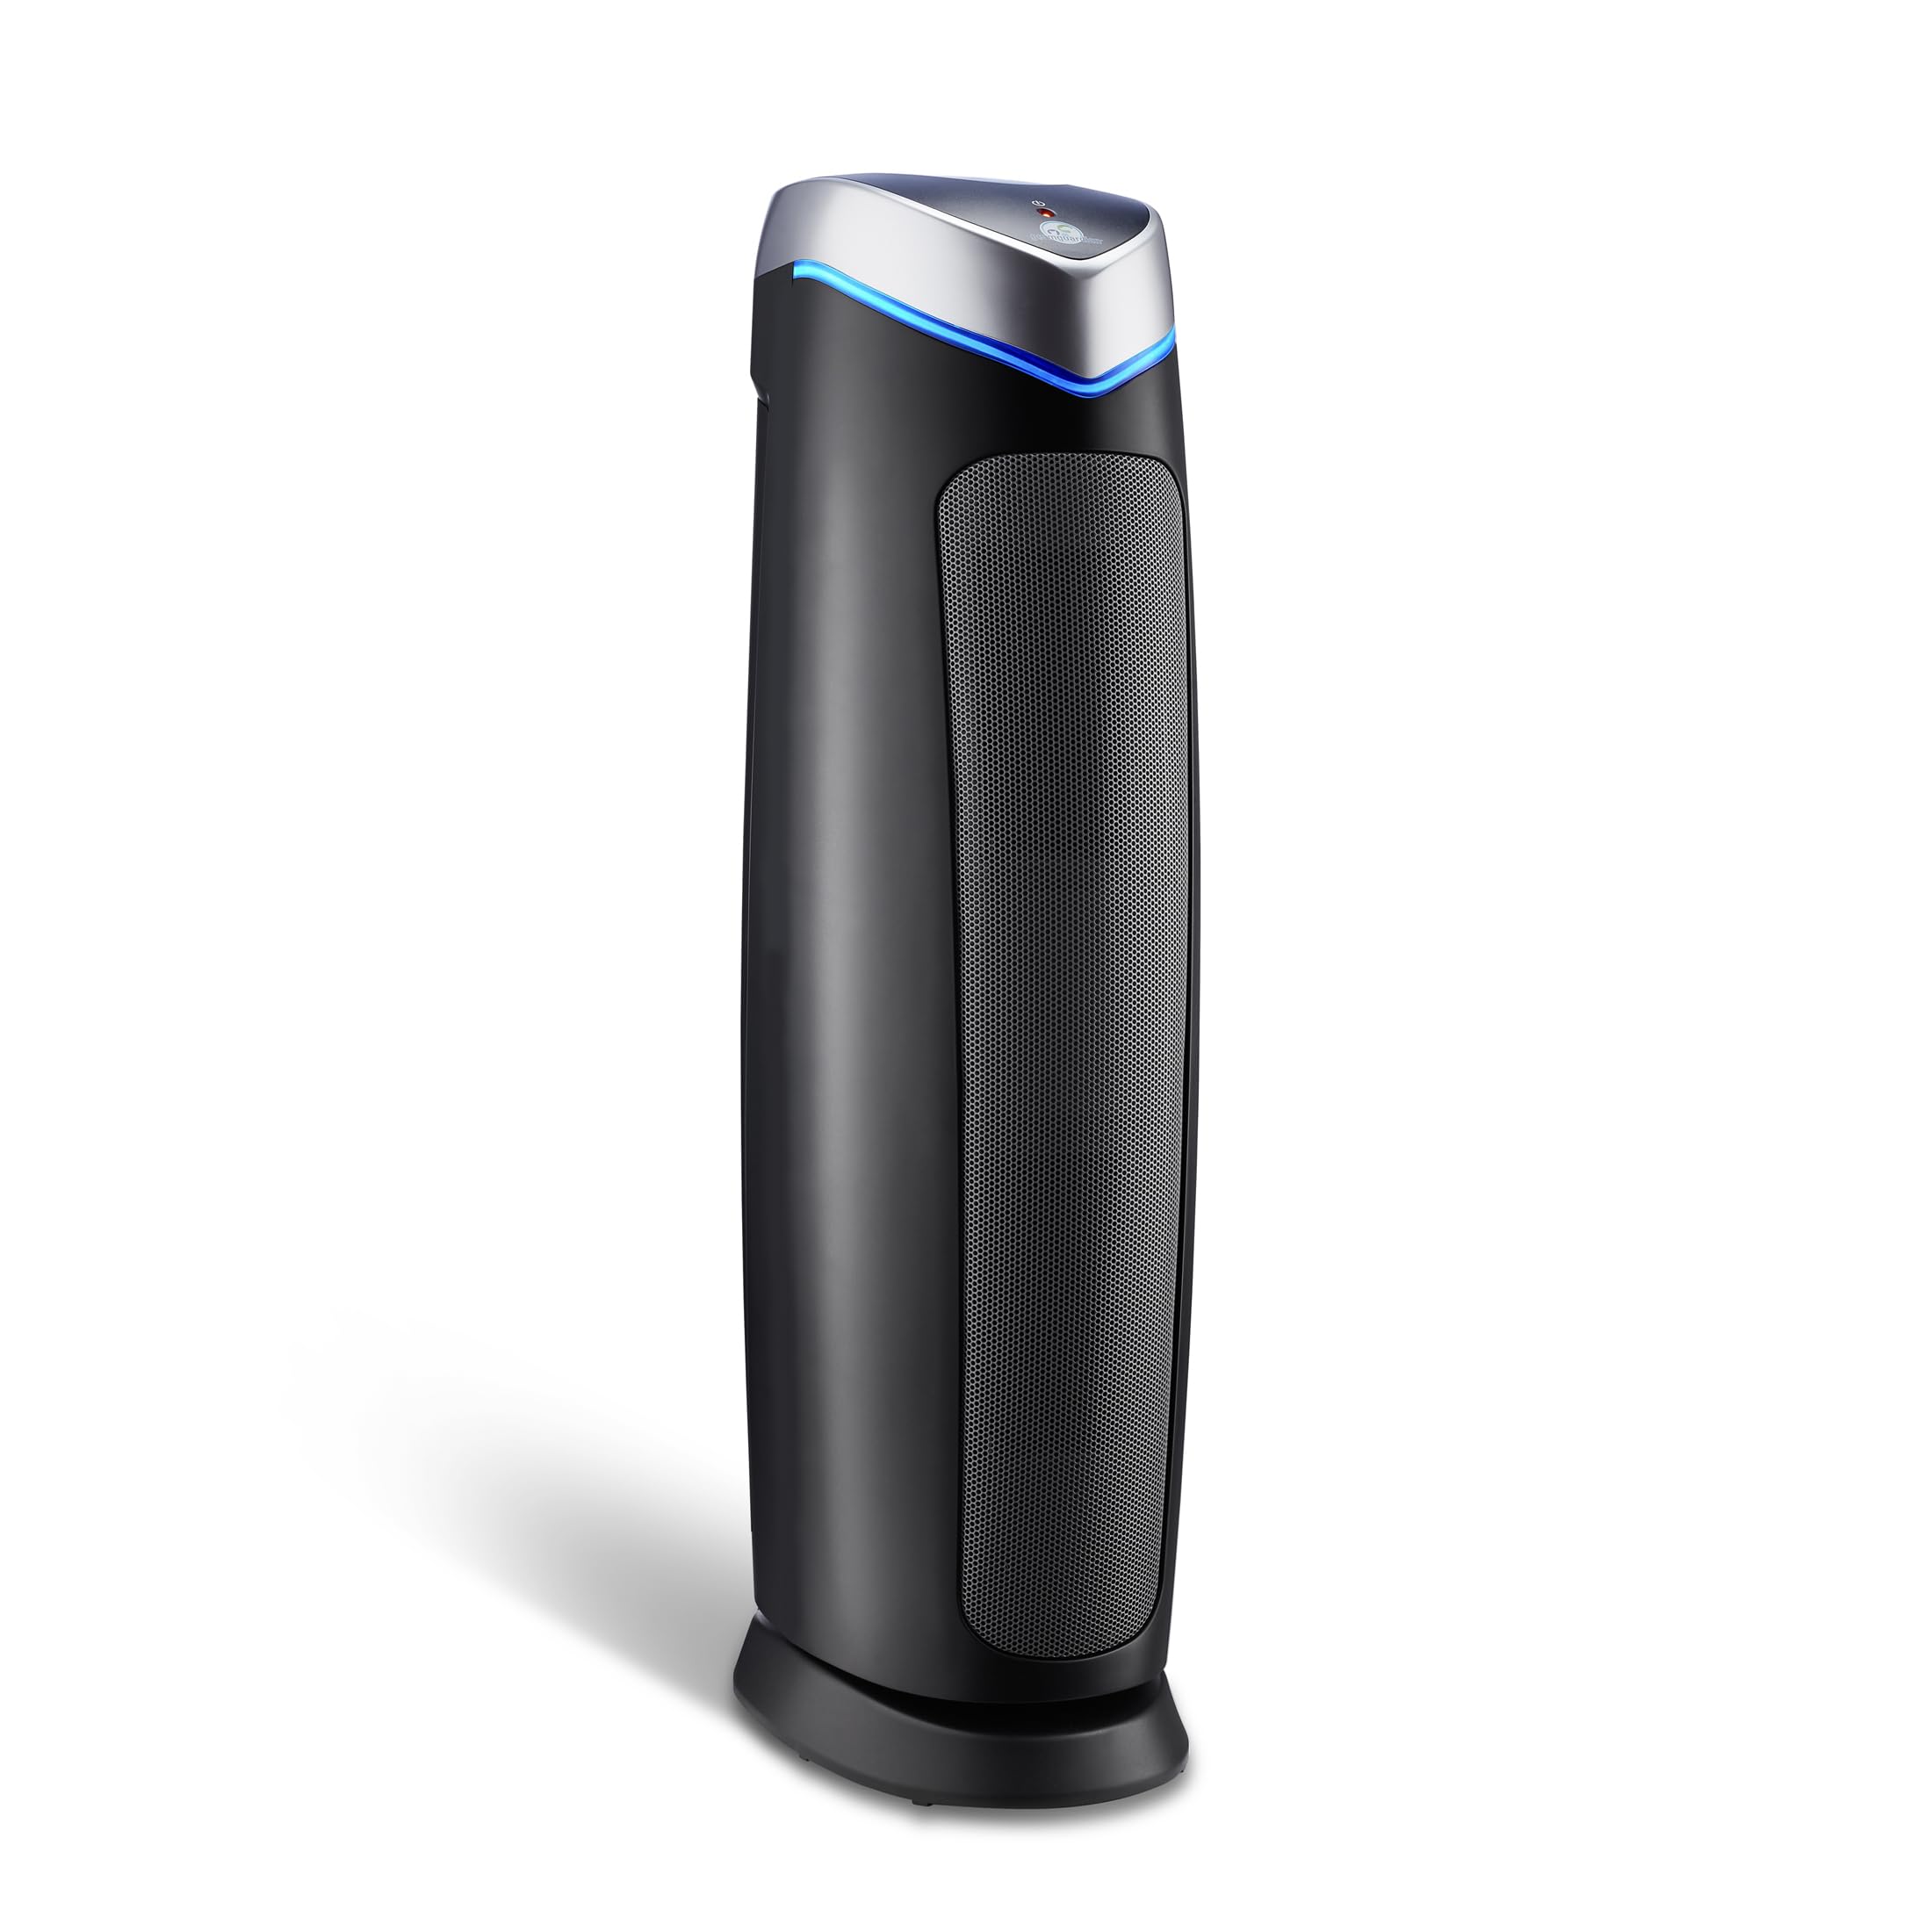  Germ Guardian GermGuardian Air Purifier with HEPA 13 Pet Filter, Removes 99.97% of Pollutants, Covers Large Room up to 915 Sq. Foot in 1 Hr, UV-C Light Helps Reduce Germs, Zero Ozone Verified, 28